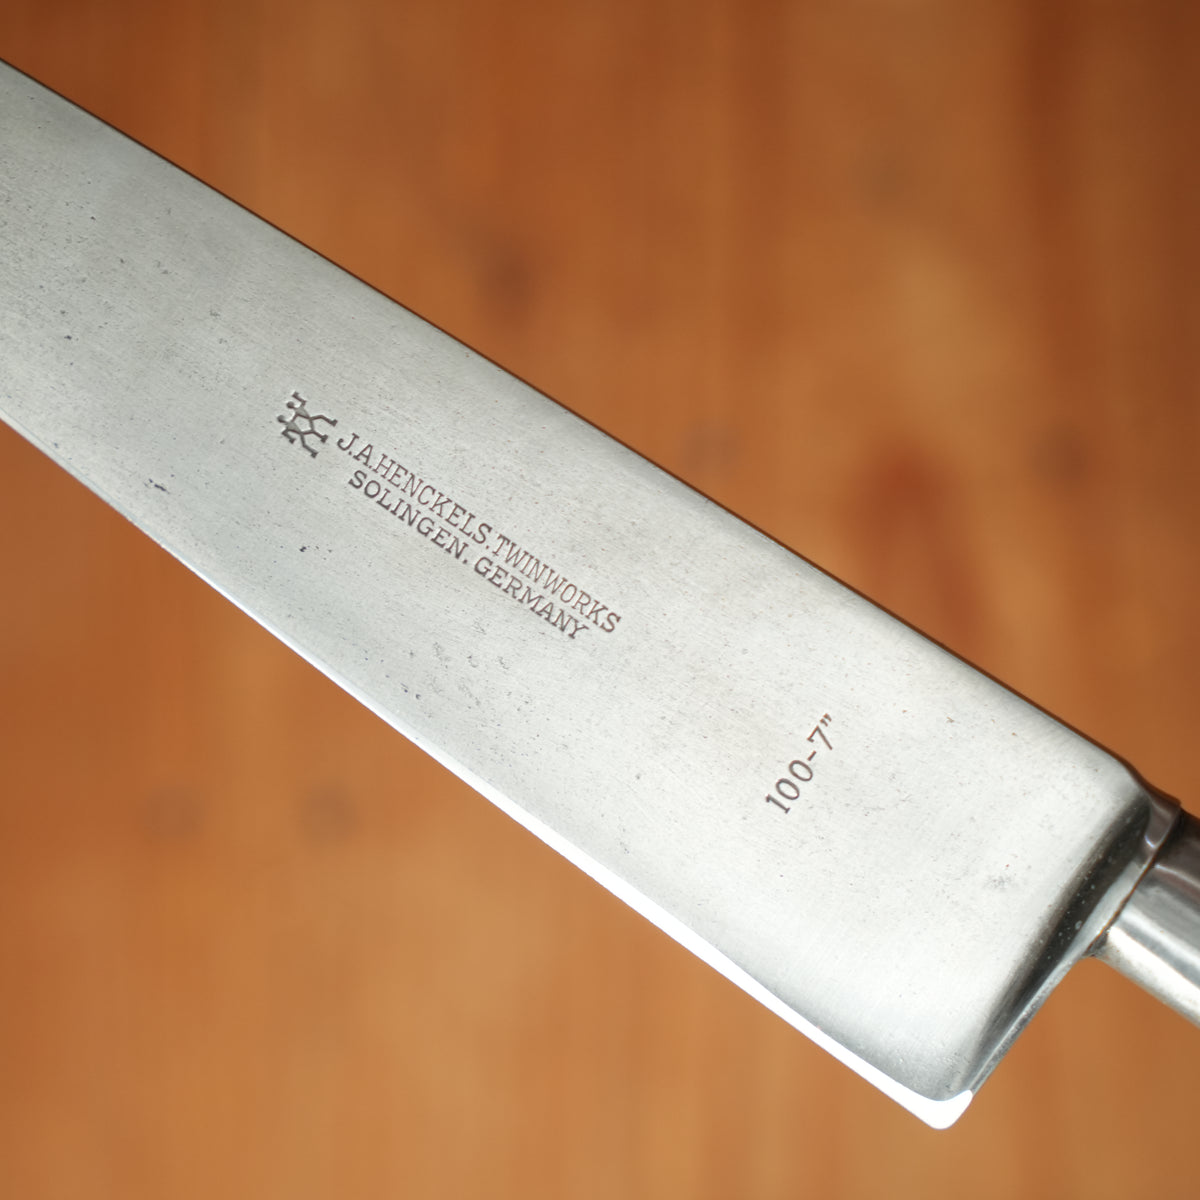 J.A. Henckels 7” French Style Chef Knife 100-7” Solingen Germany 1920s 30s